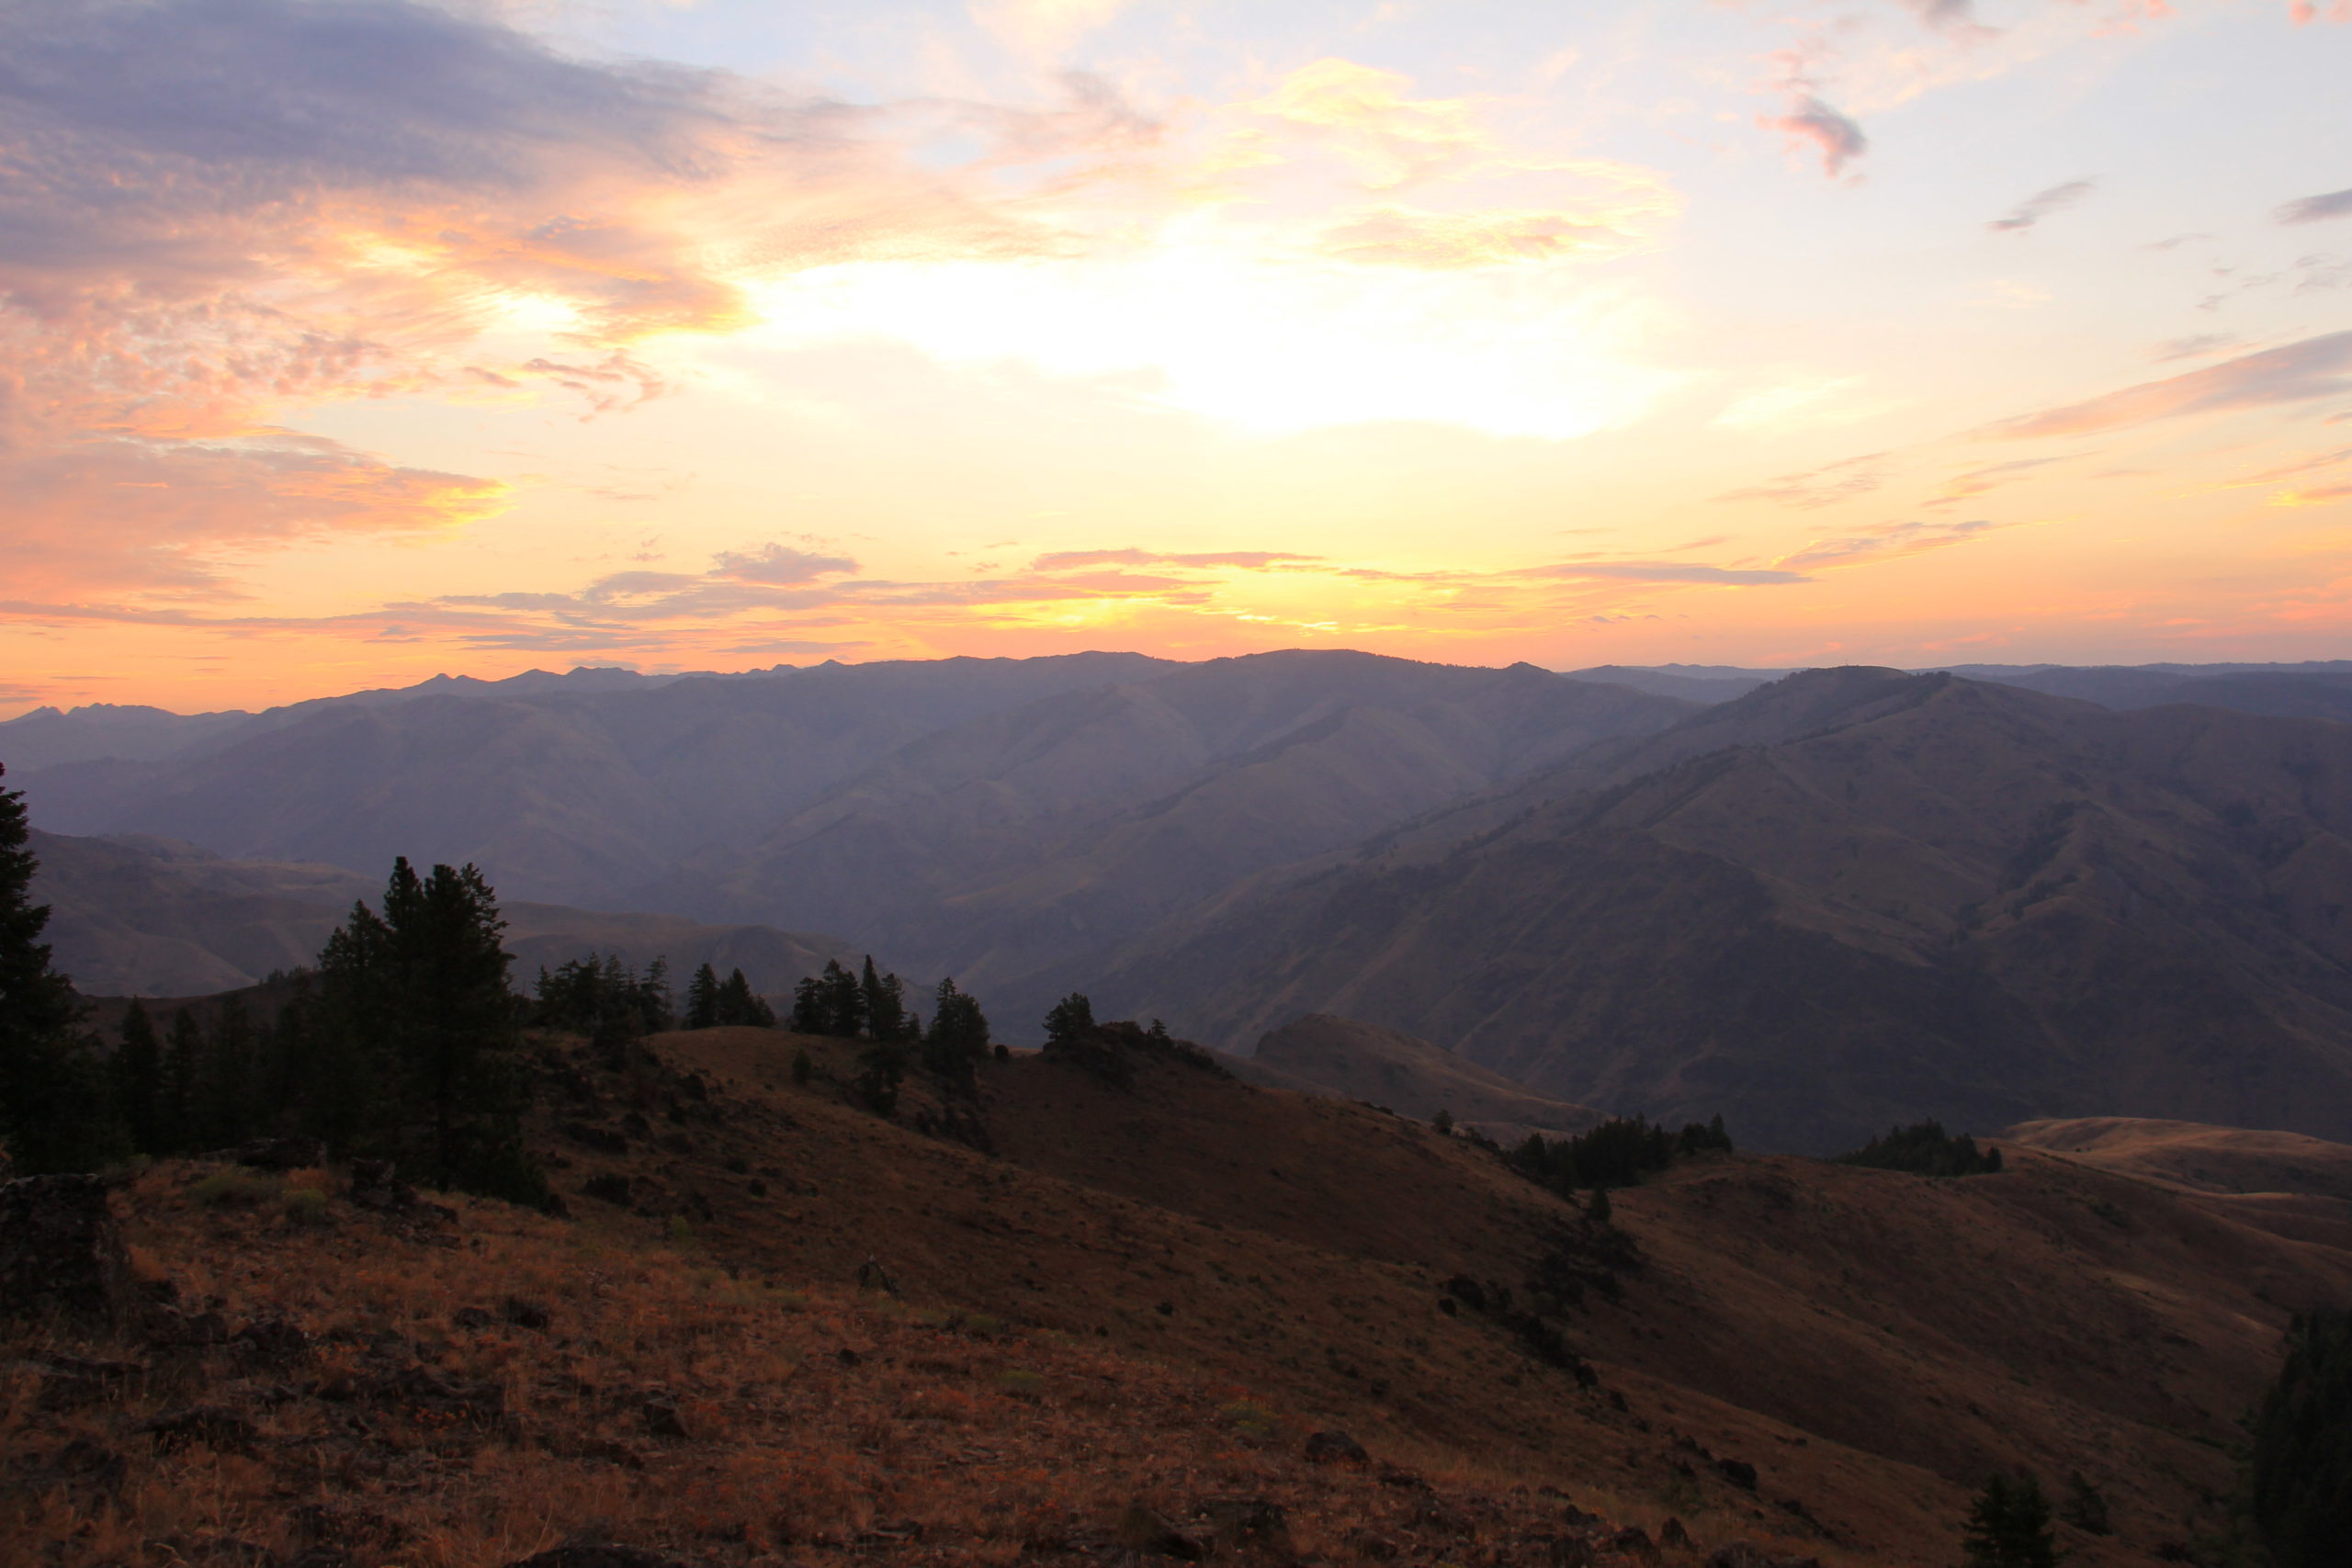 Your Hells Canyon, Oregon Adventure Guide